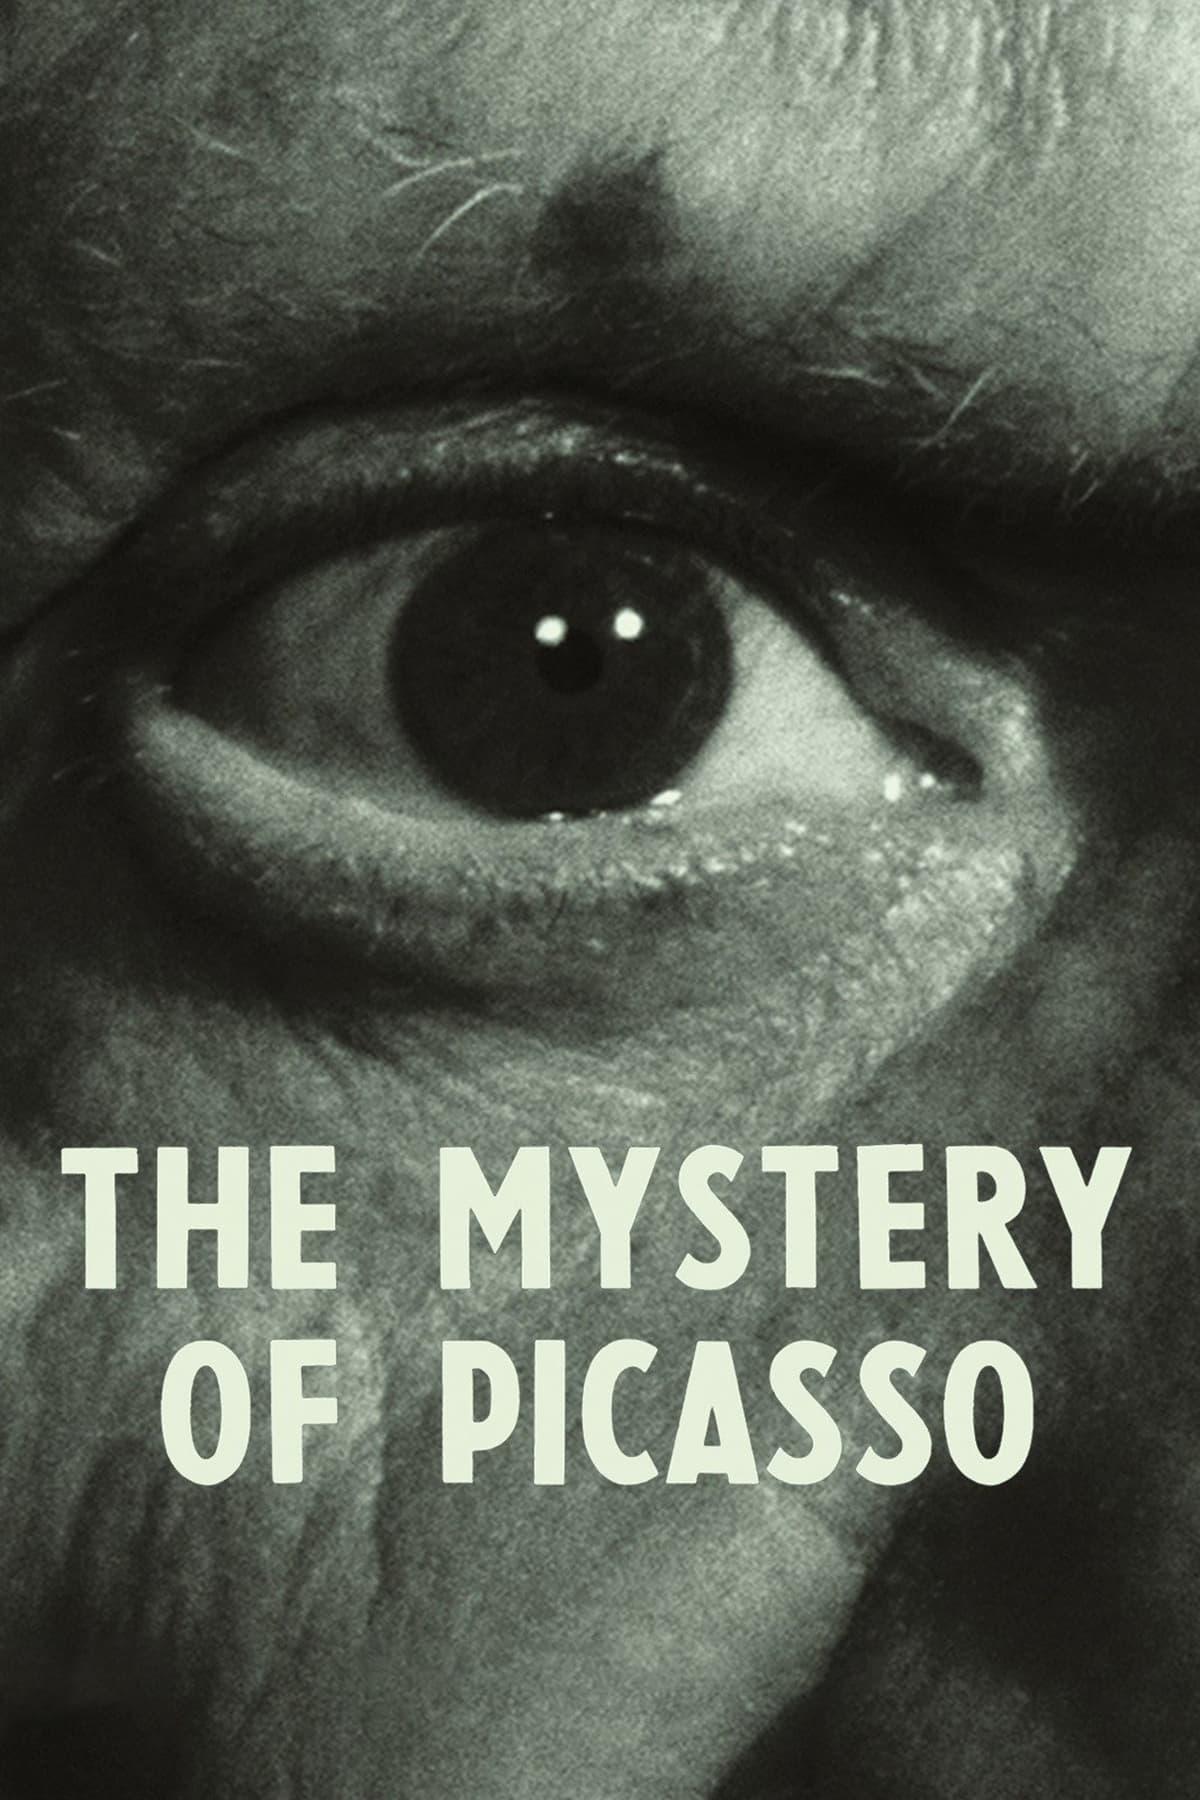 The Mystery of Picasso poster